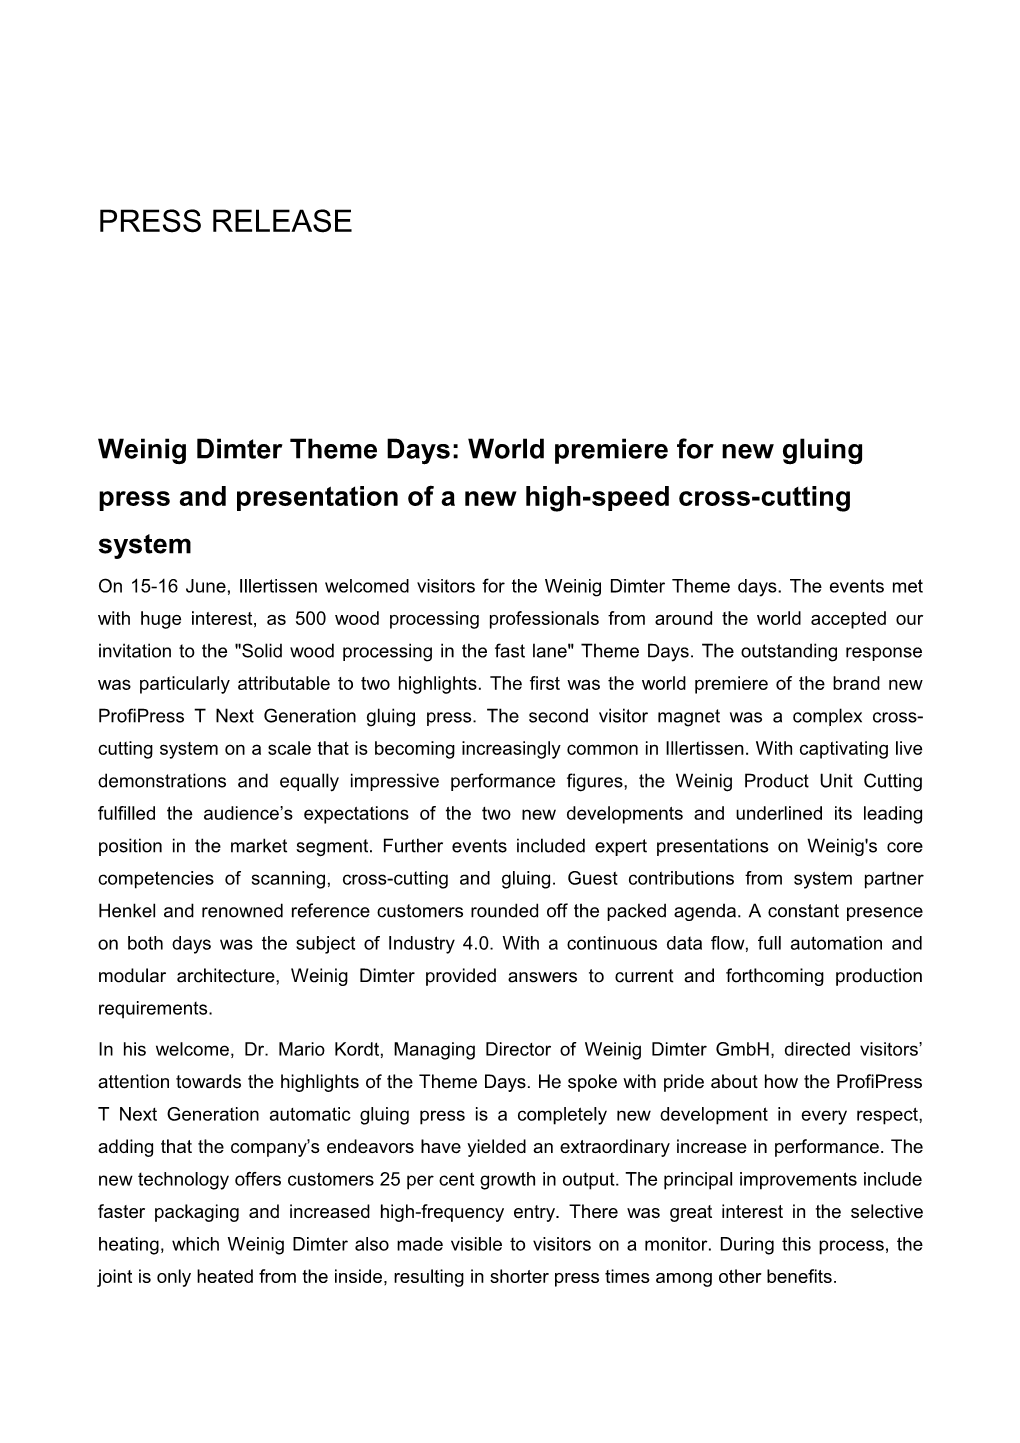 Weinig Dimter Theme Days: World Pr Emiere for New Gluing Press and Presentation of a New